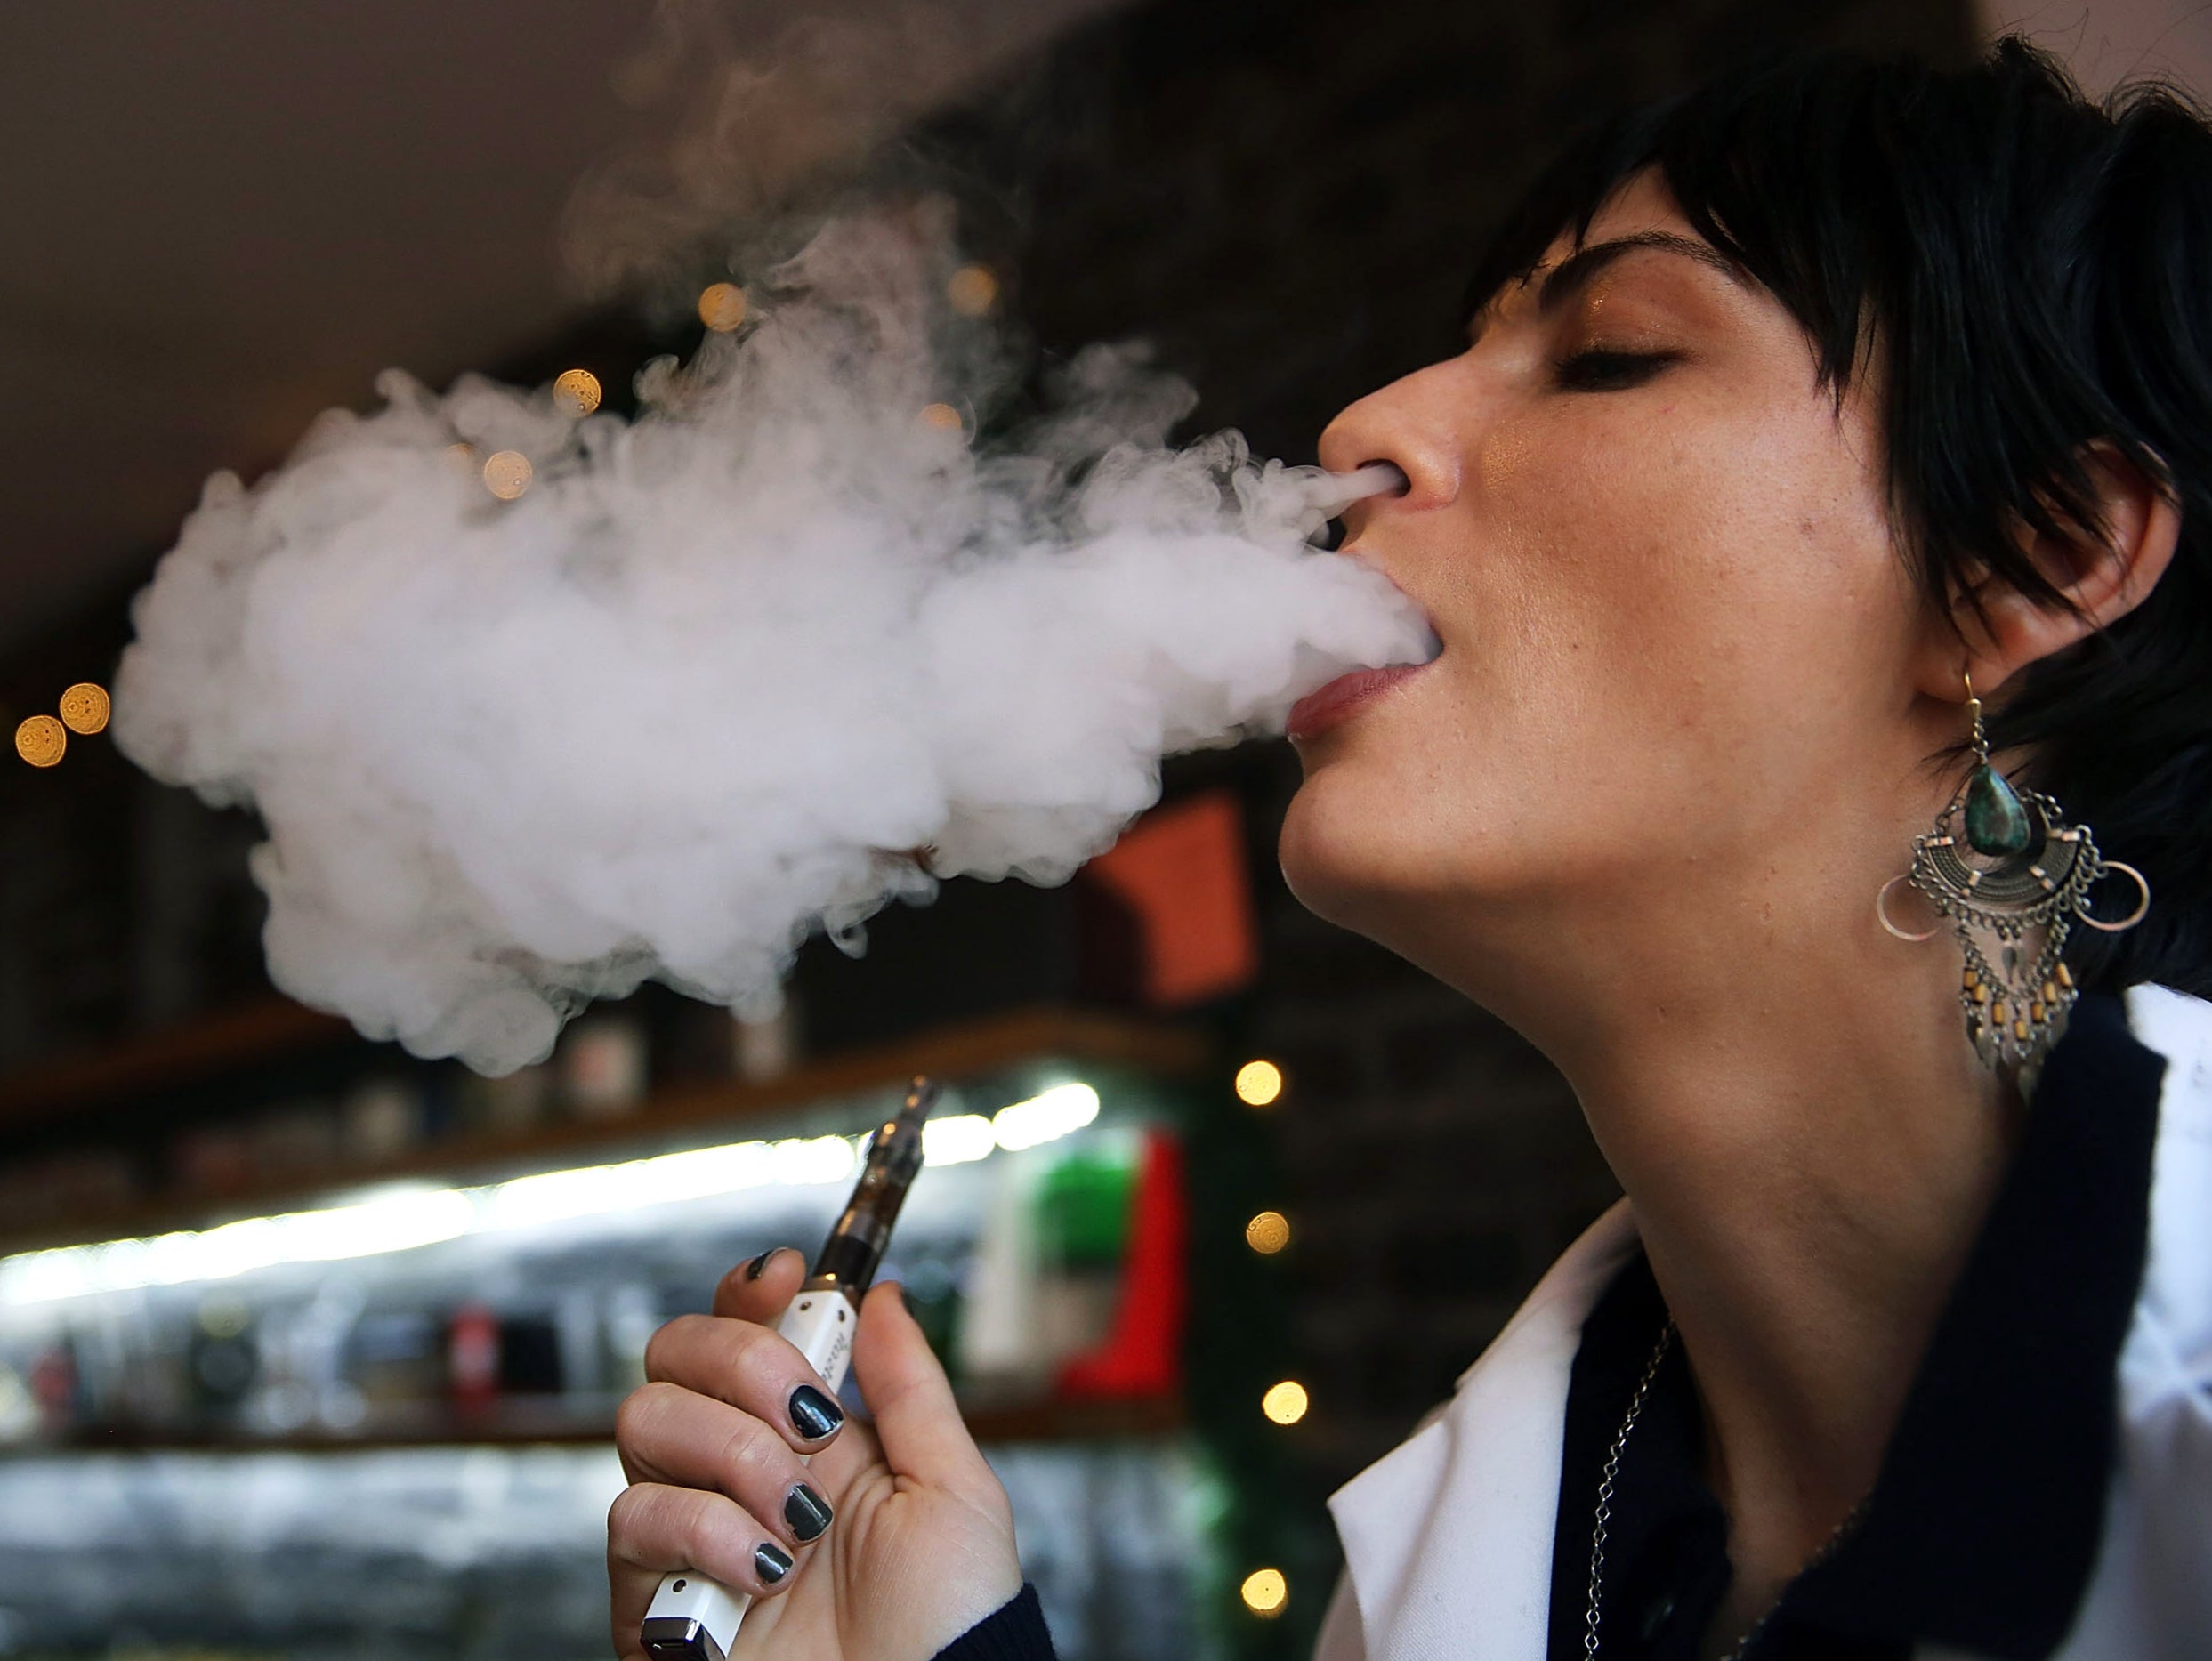 Doctors could prescribe vaping to smokers who want to quit